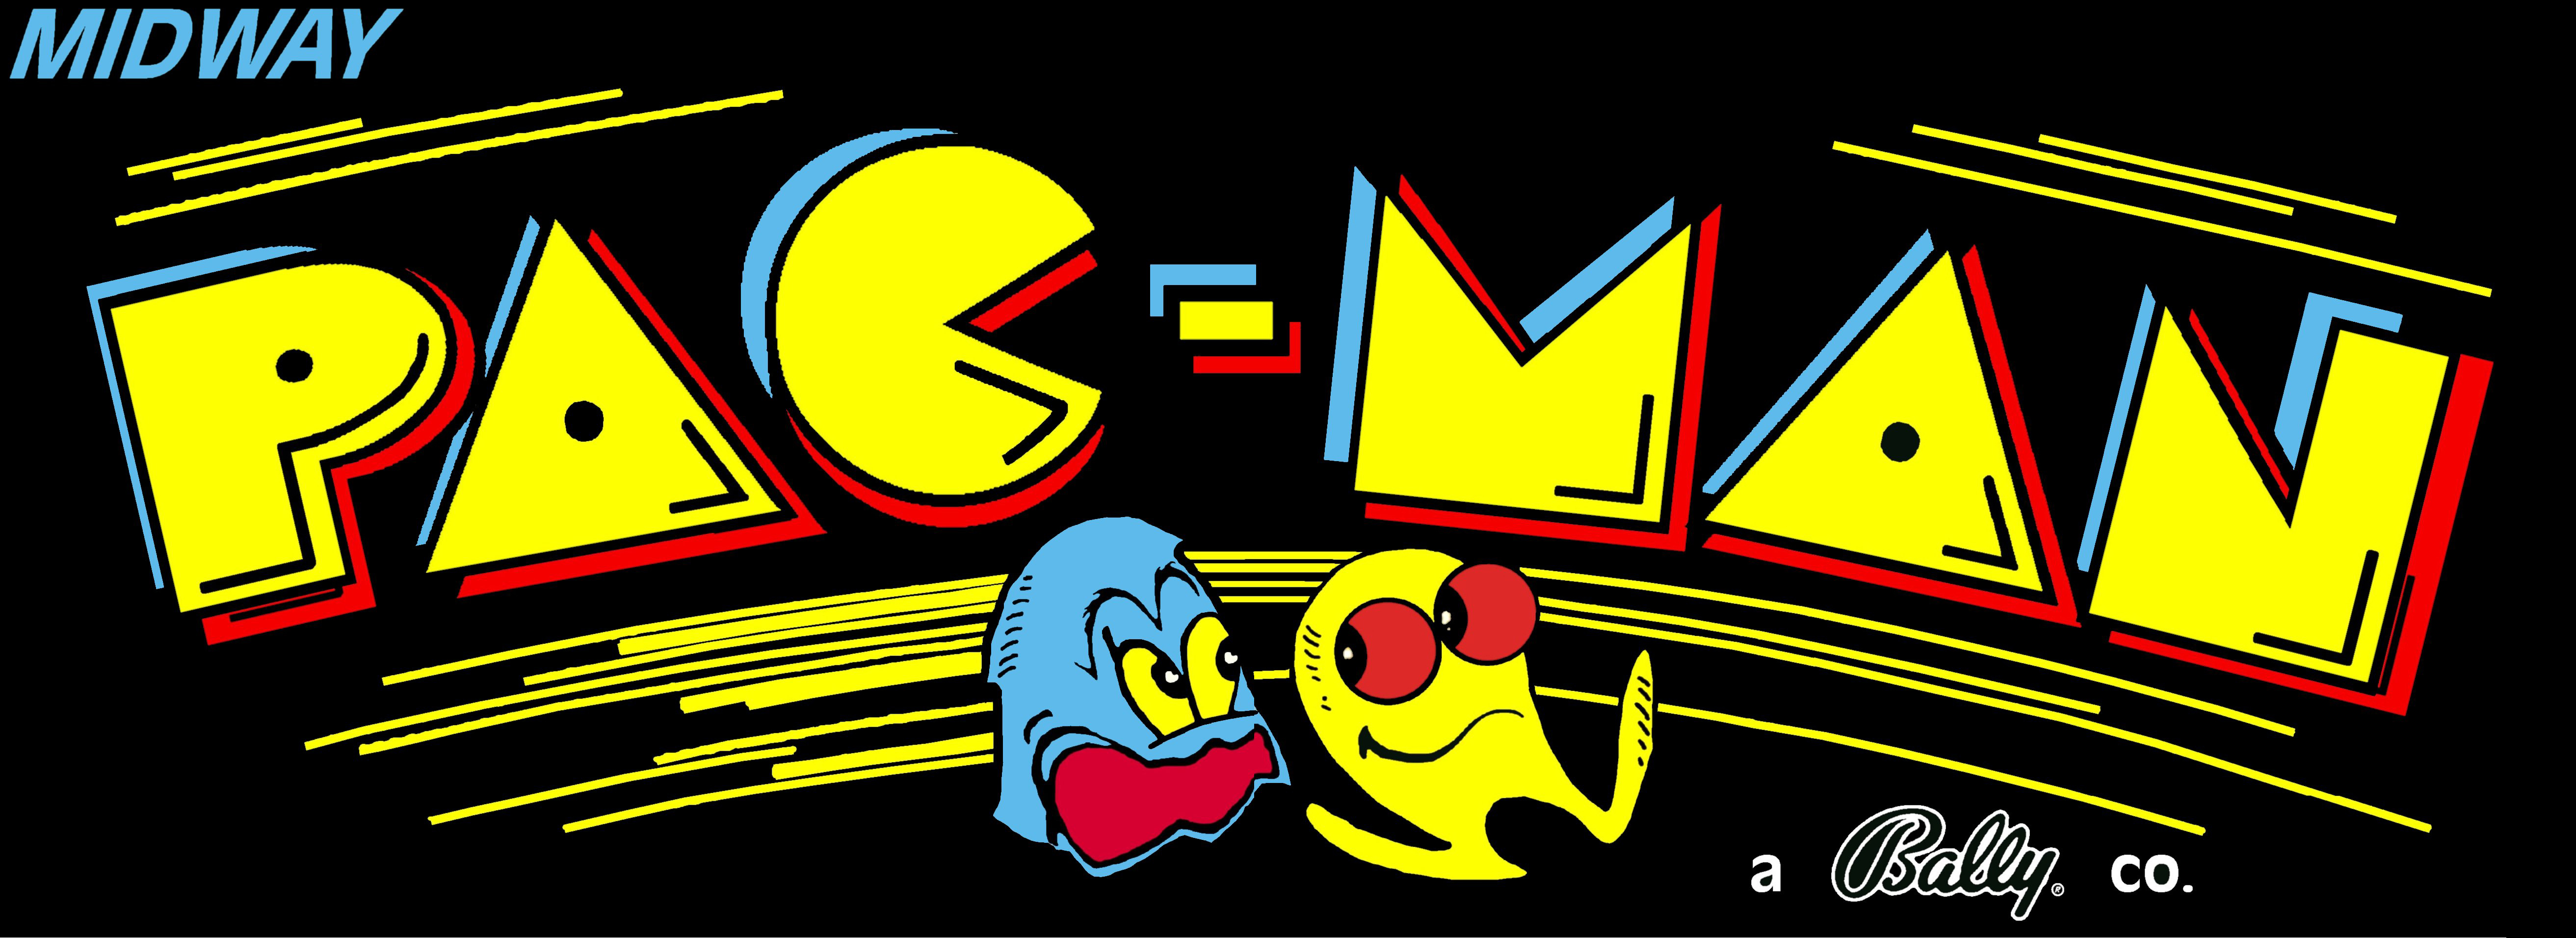 General 5250x1912 arcade marquee Pac-Man  Midway digital art ultrawide video game art simple background bally arcade cabinet minimalism black background title video games watermarked